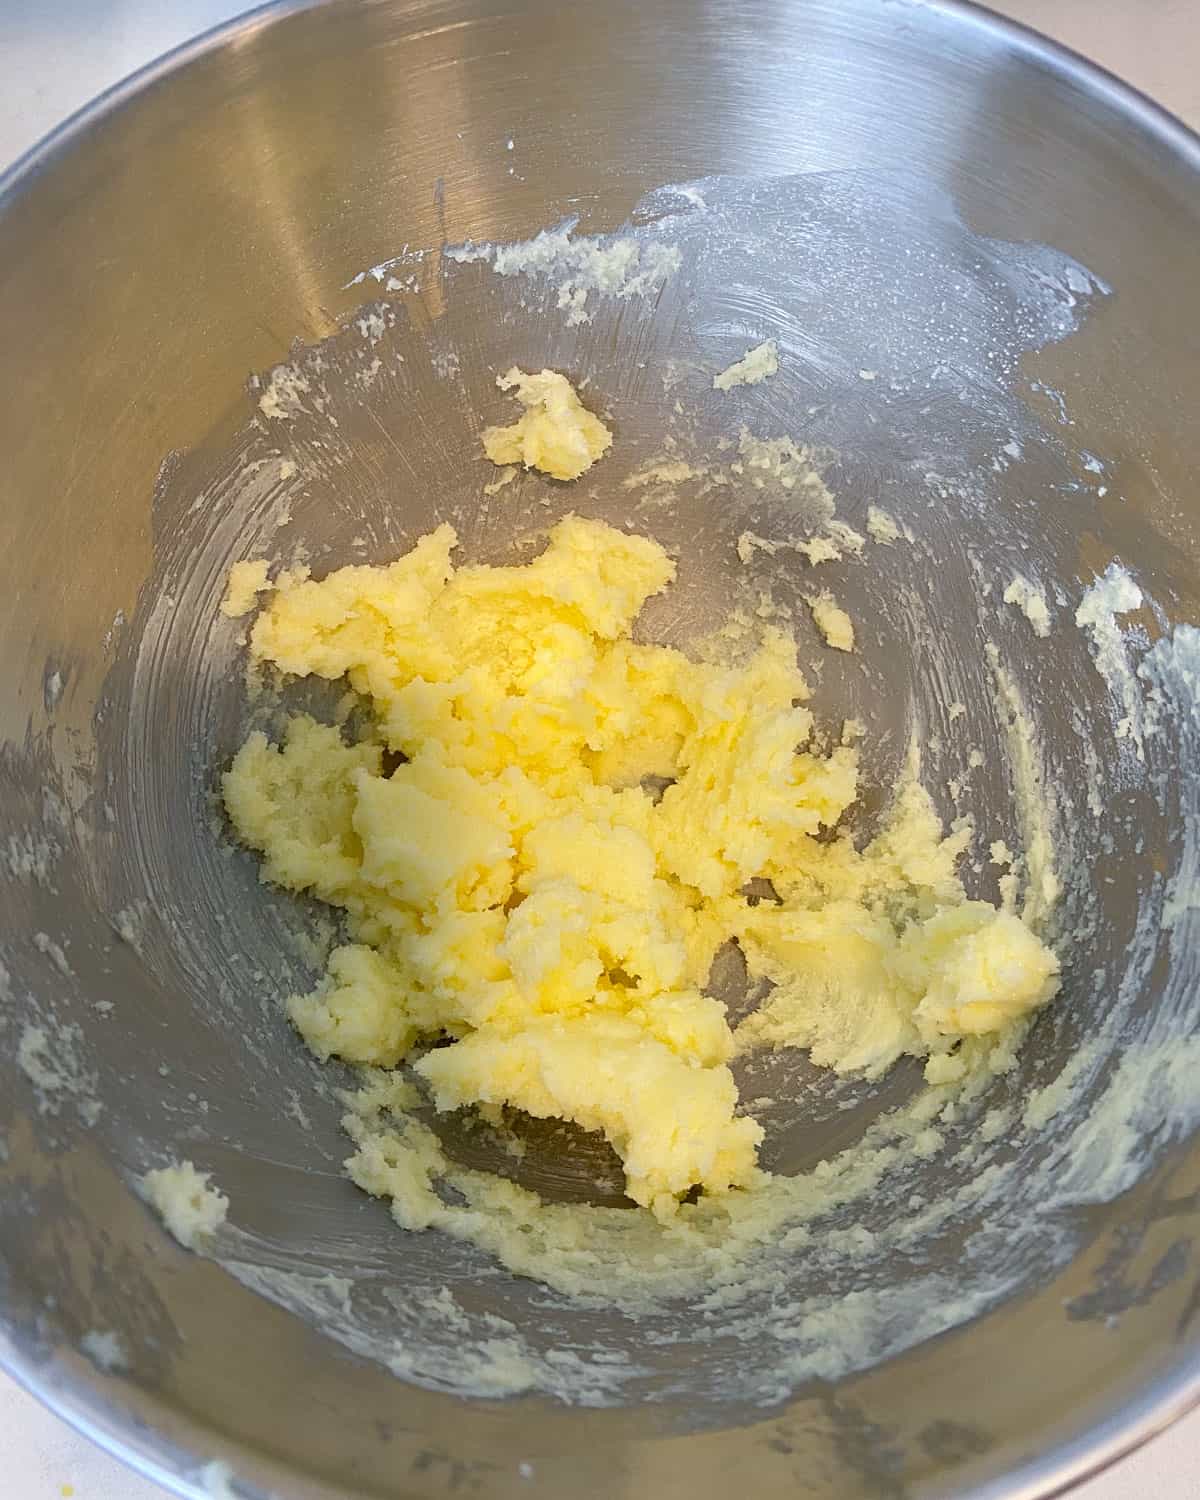 Using an electric mixer, mix the softened butter and sugar until well combined.